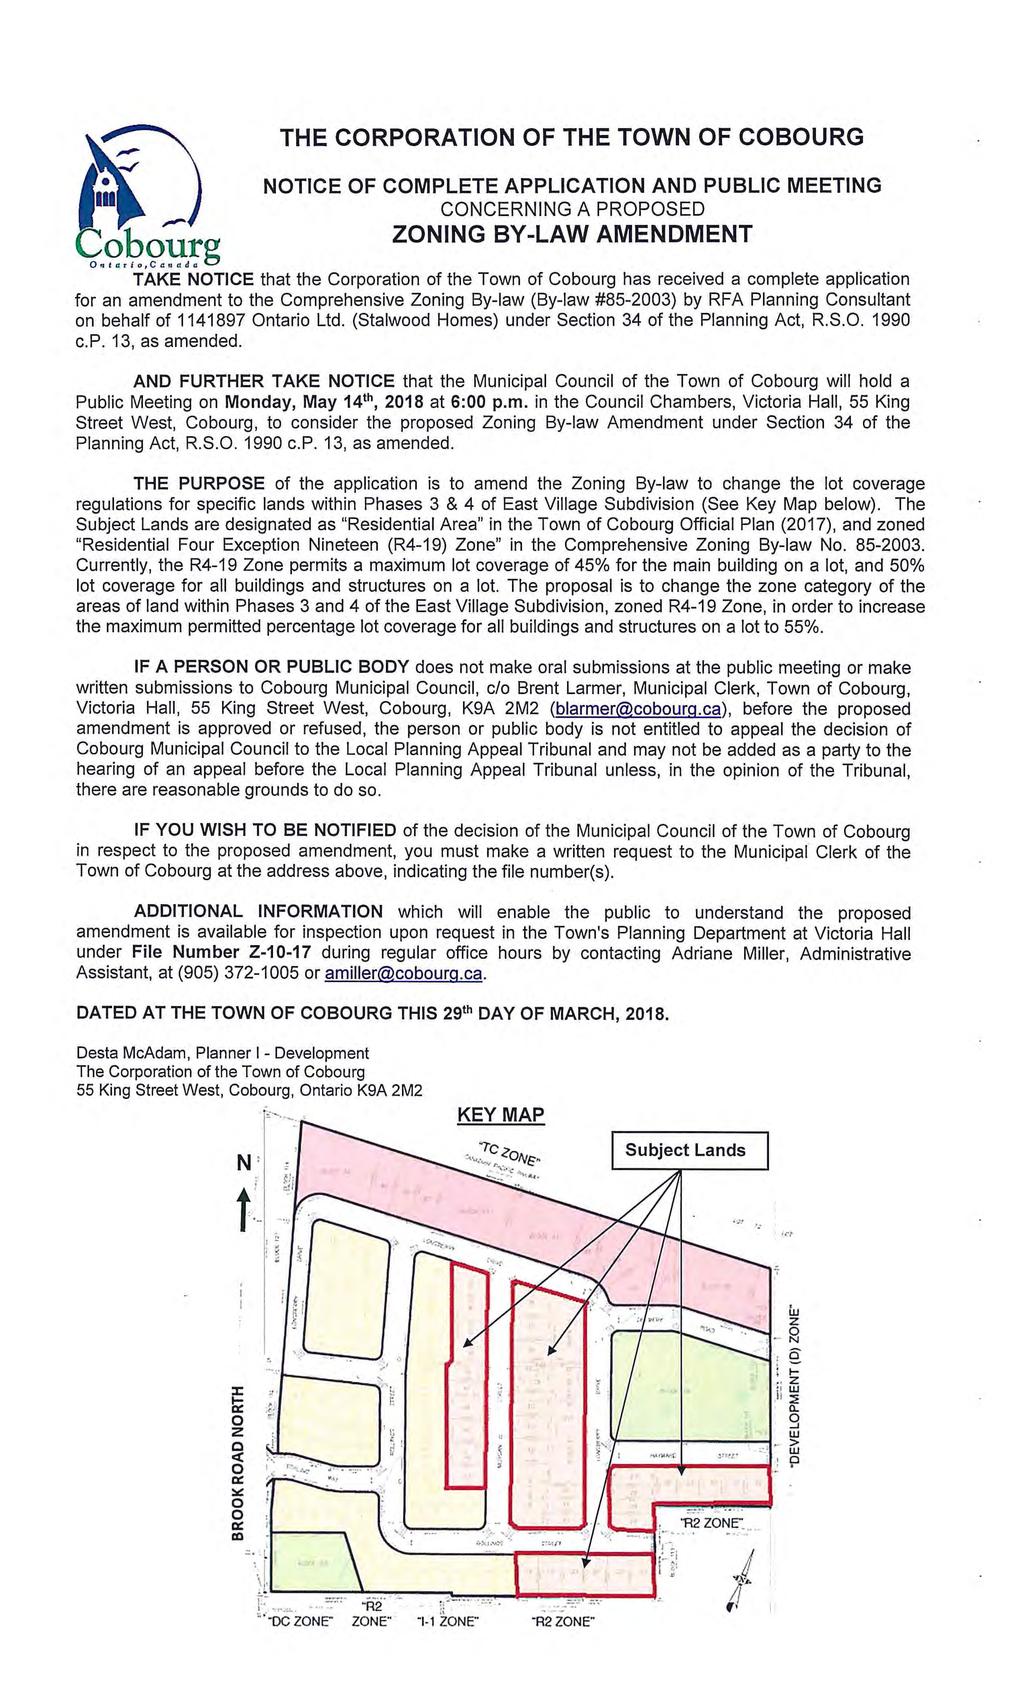 Olobourg THE CORPORATION OF THE TOWN OF COBOURG NOTICE OF COMPLETE APPLICATION AND PUBLIC MEETING CONCERNING A PROPOSED ZONING BY-LAW AMENDMENT TAKE NOTICE that the Corporation of the Town of Cobourg